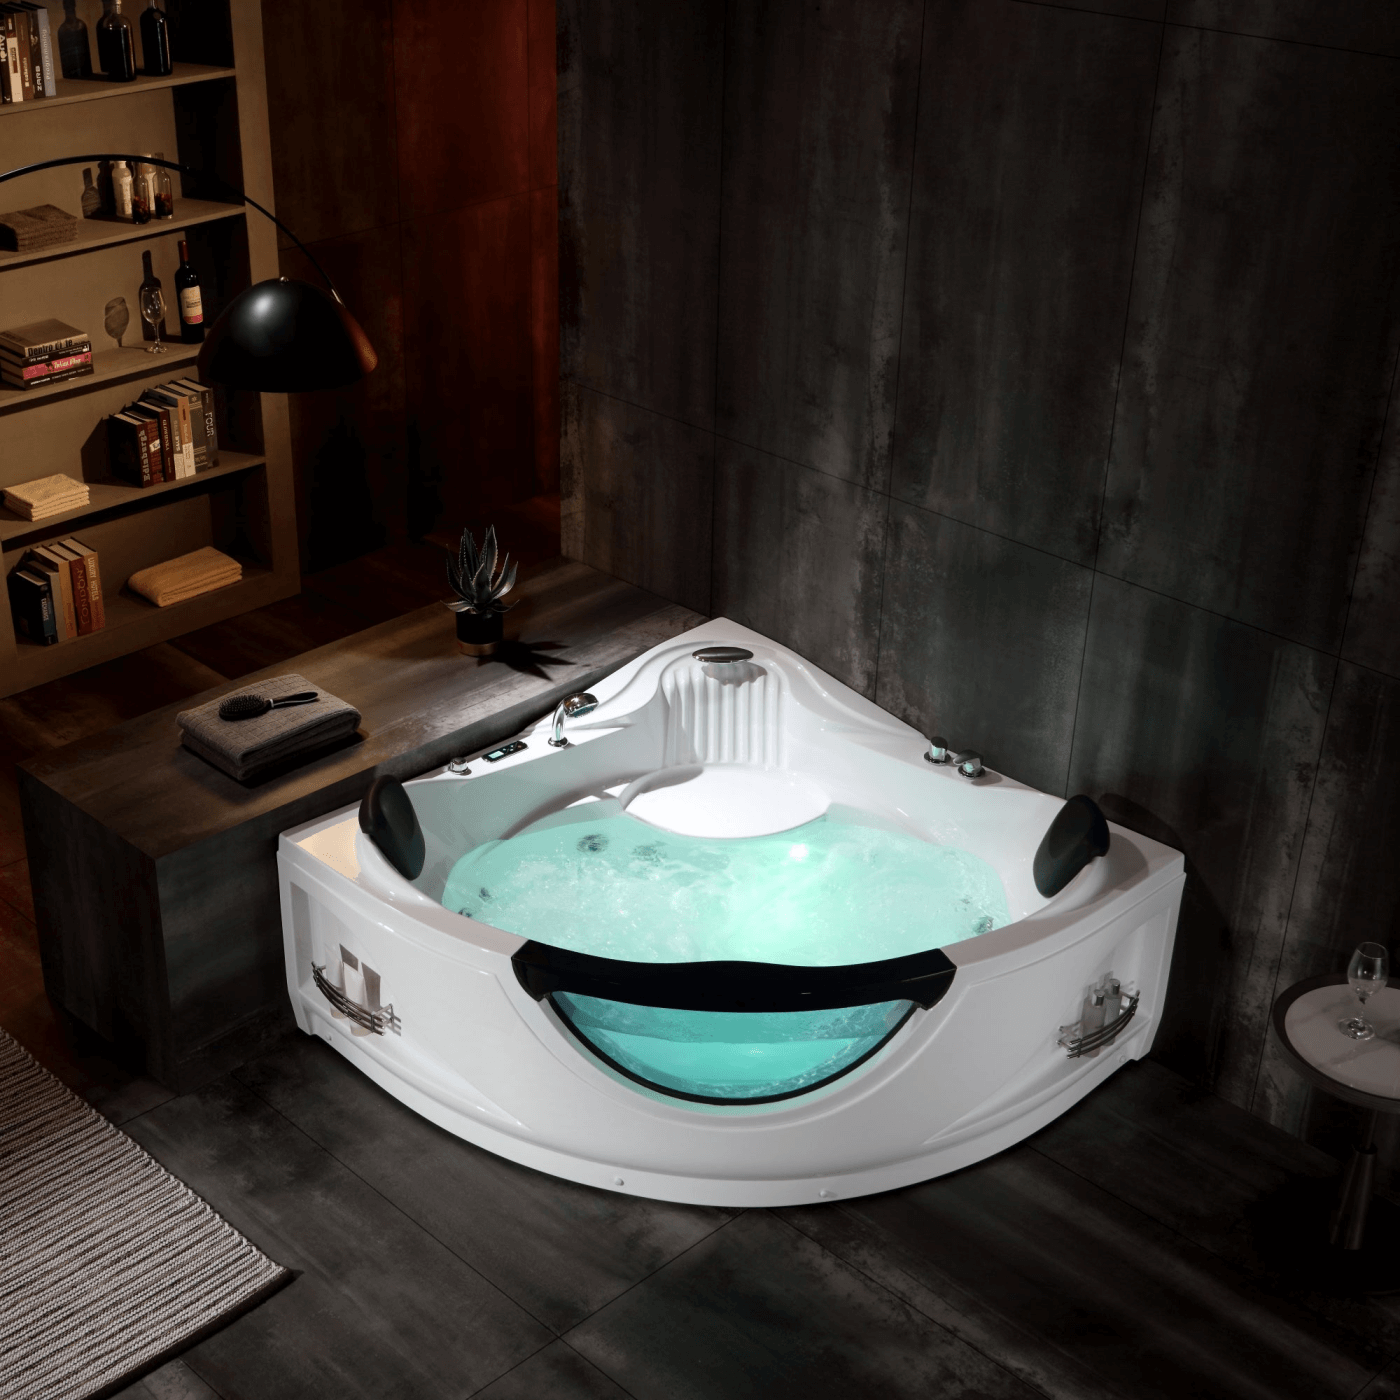 Empava Jetted Tub - in a bathroom with dark lighting